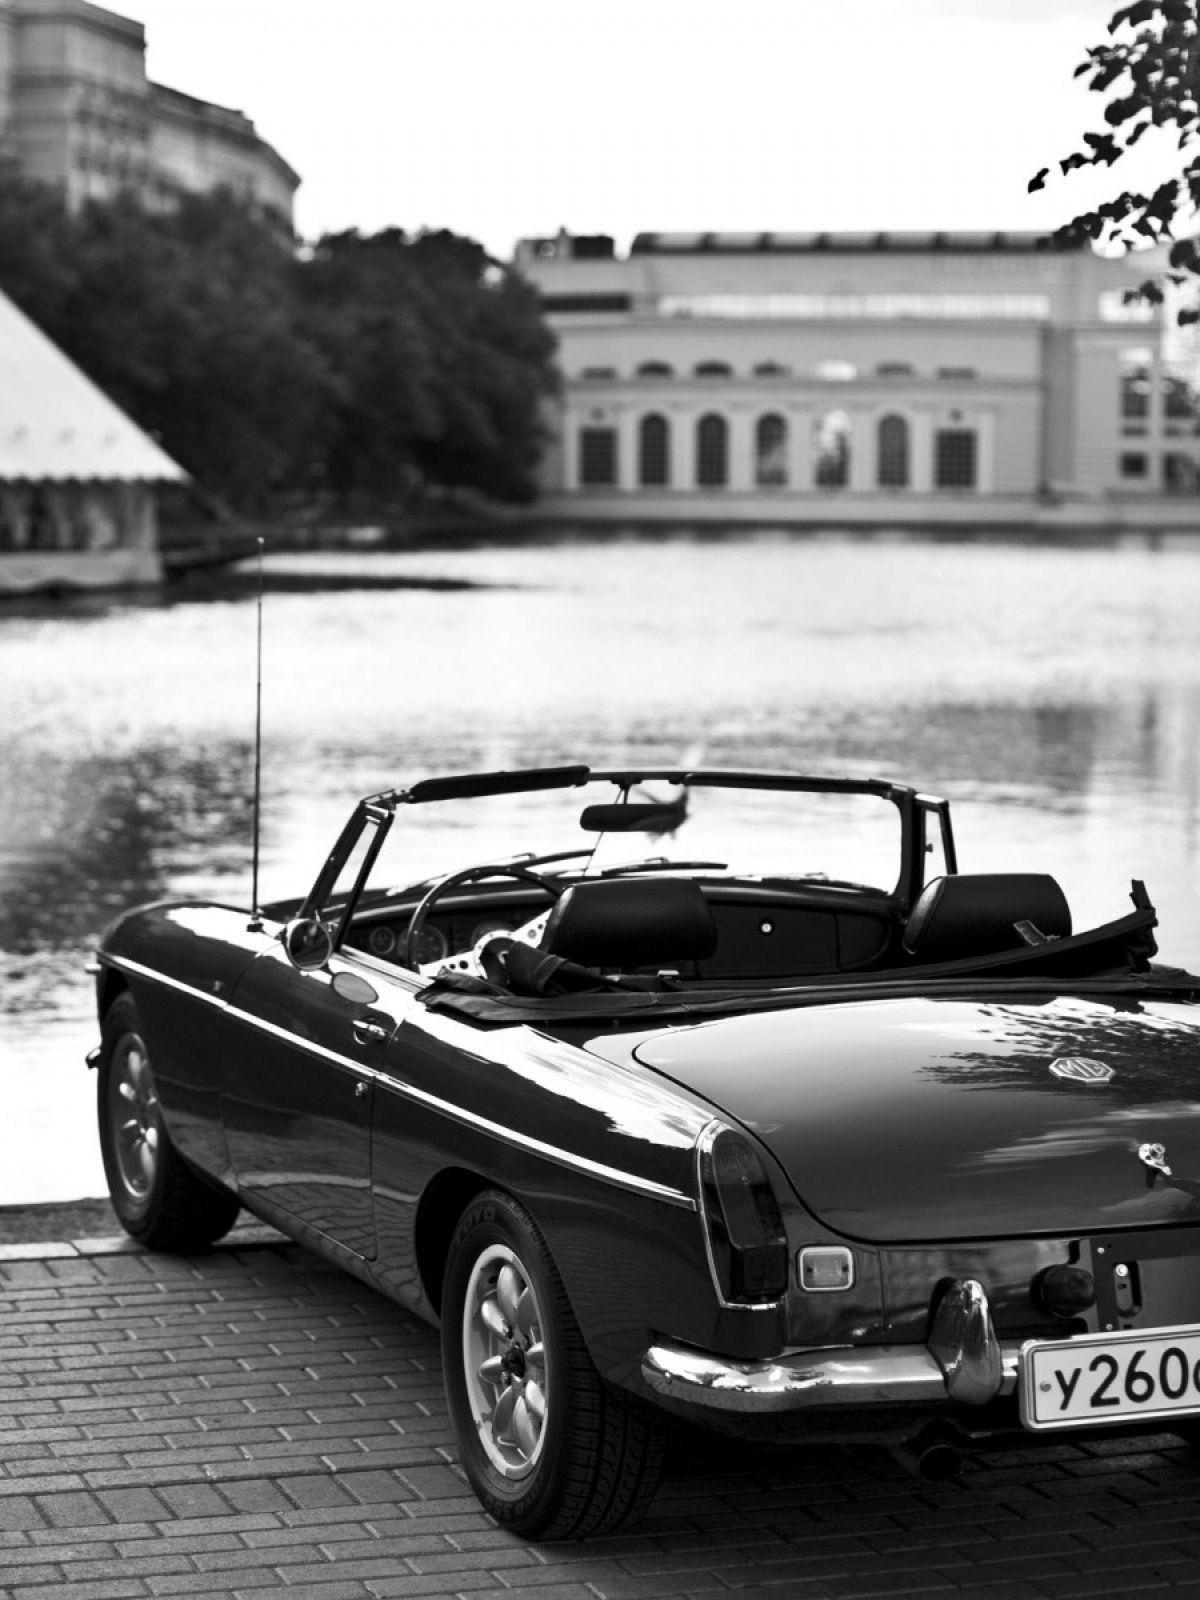 Black and White Car Wallpapers - Top Free Black and White Car